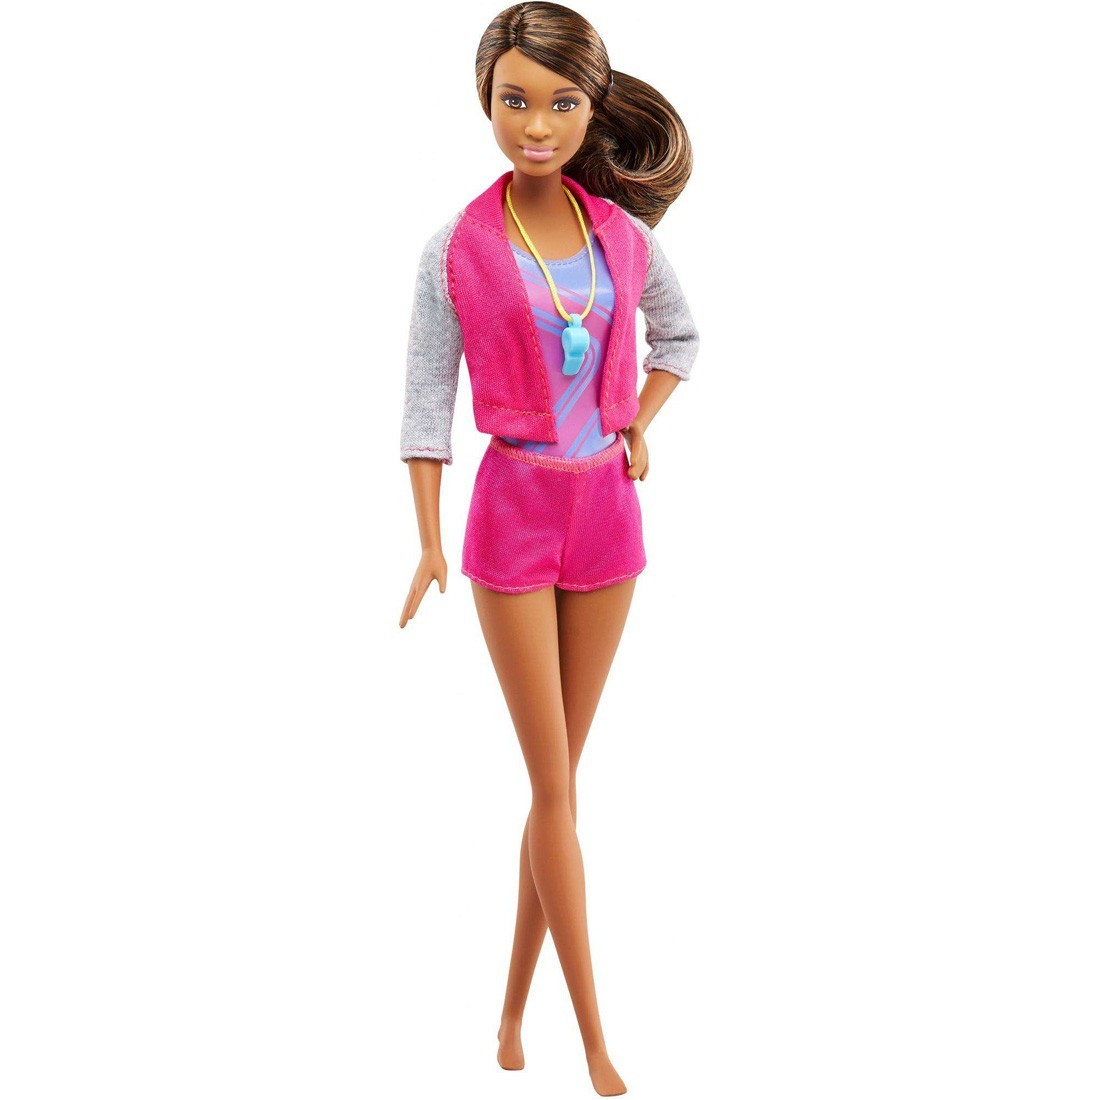 Buy Barbie Careers Gymnastic Coach Playset - Brunette - Barbie, delivered  to your home | TheOutfit